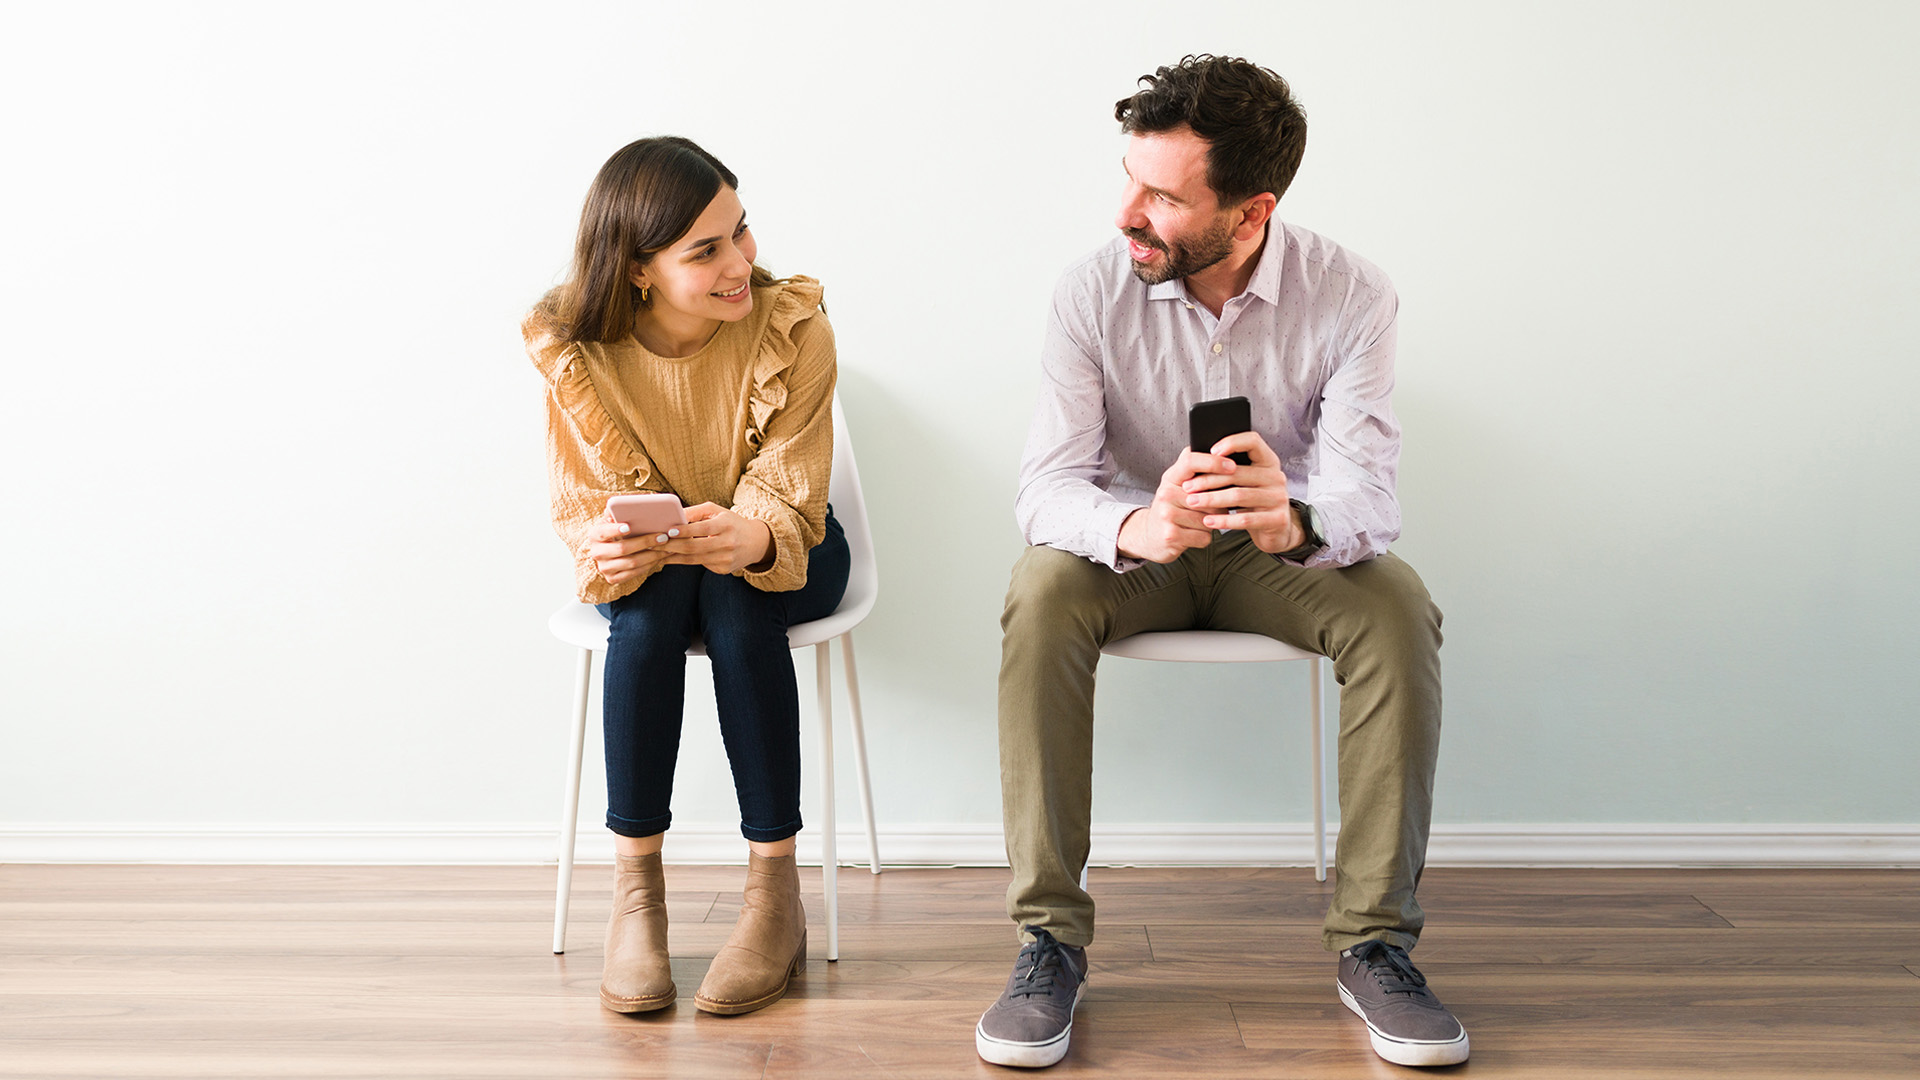 Brunette woman and dark-haired man sitting on chairs next to each other, looking at each other while holding their phones.